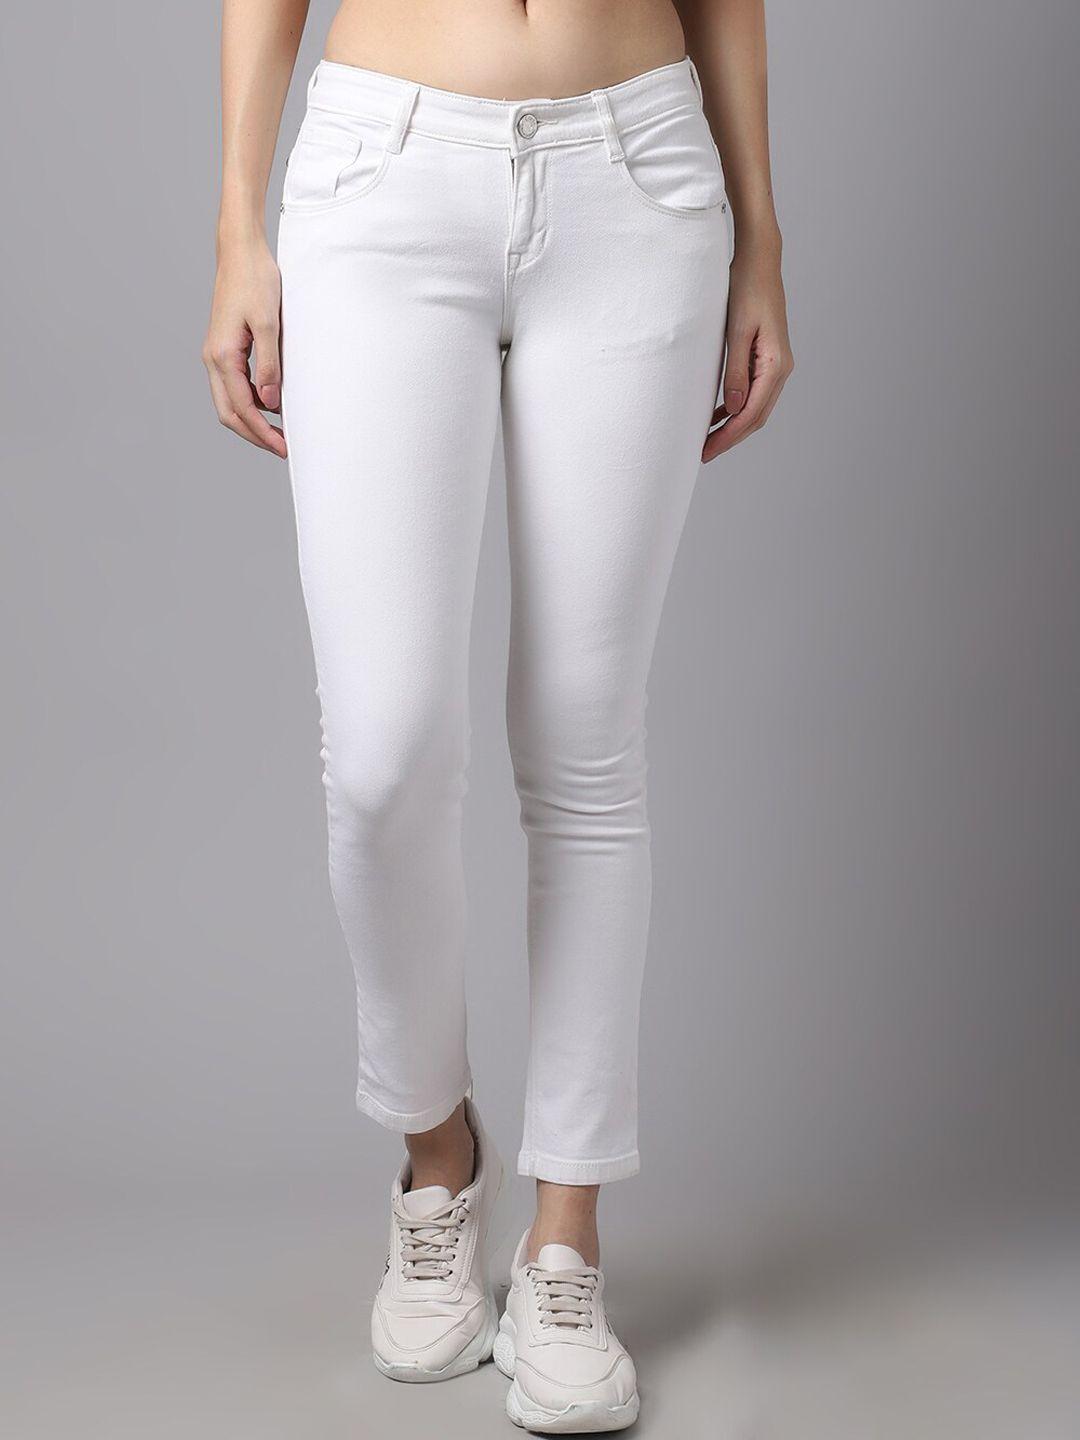 crozo by cantabil women white jeans